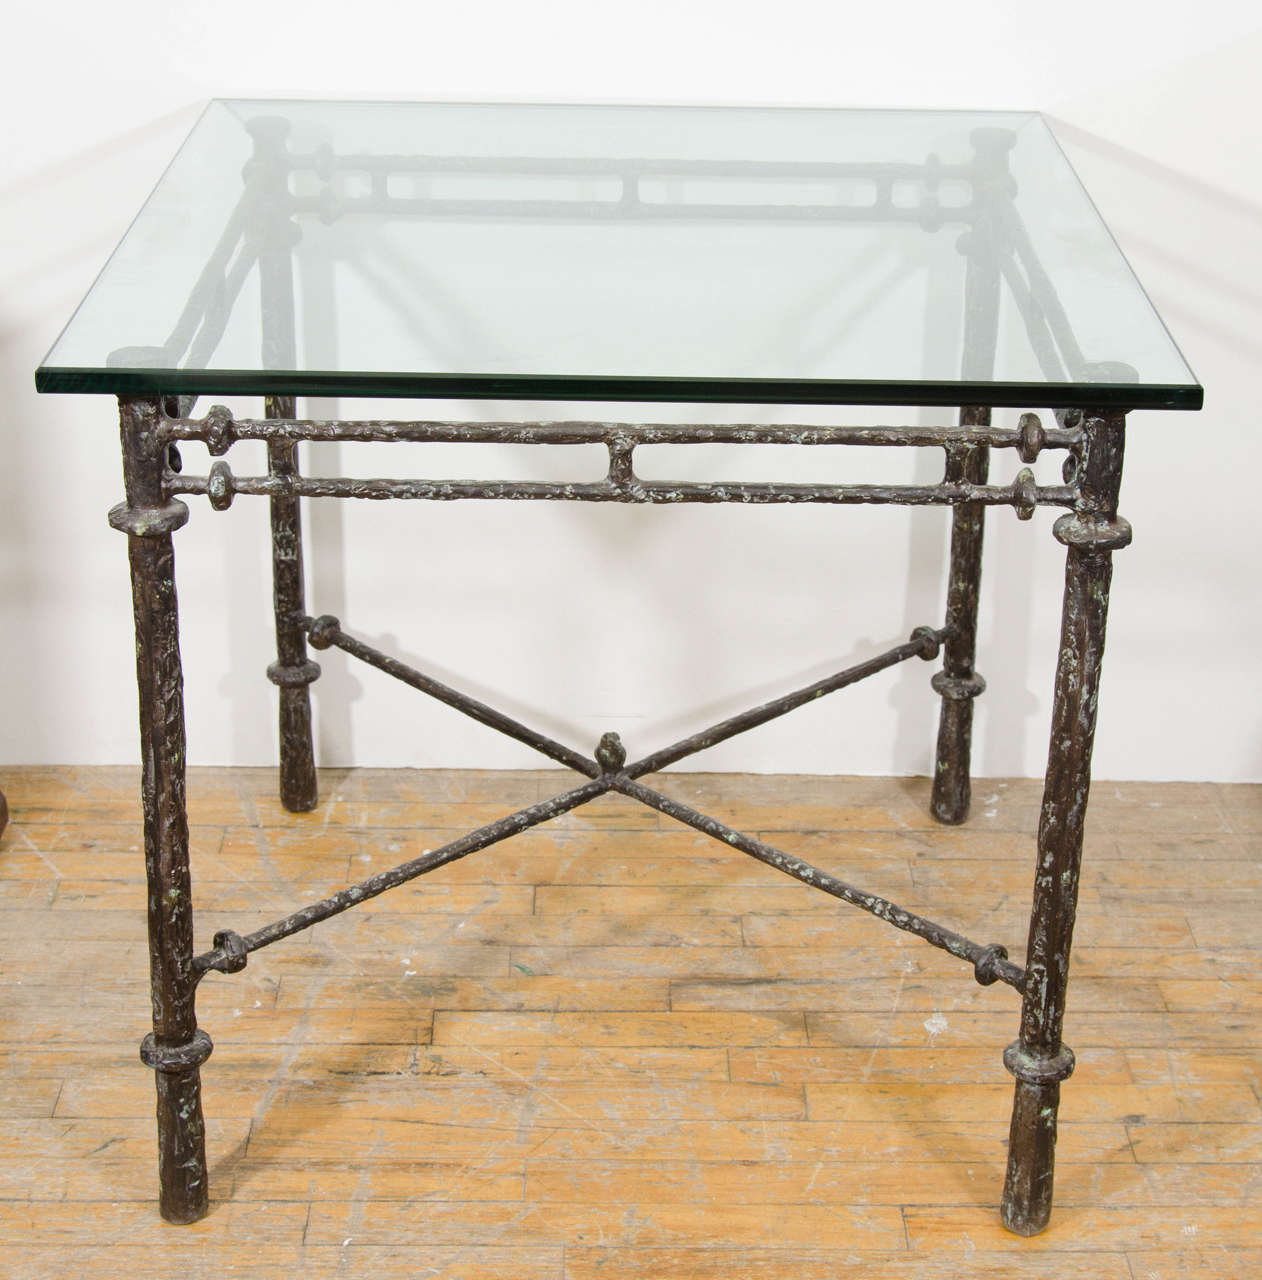 A vintage Diego Giacometti style cast iron X-base table with a decorative bird sitting on the cross bar stretchers and glass top. Good vintage condition with age appropriate patina.